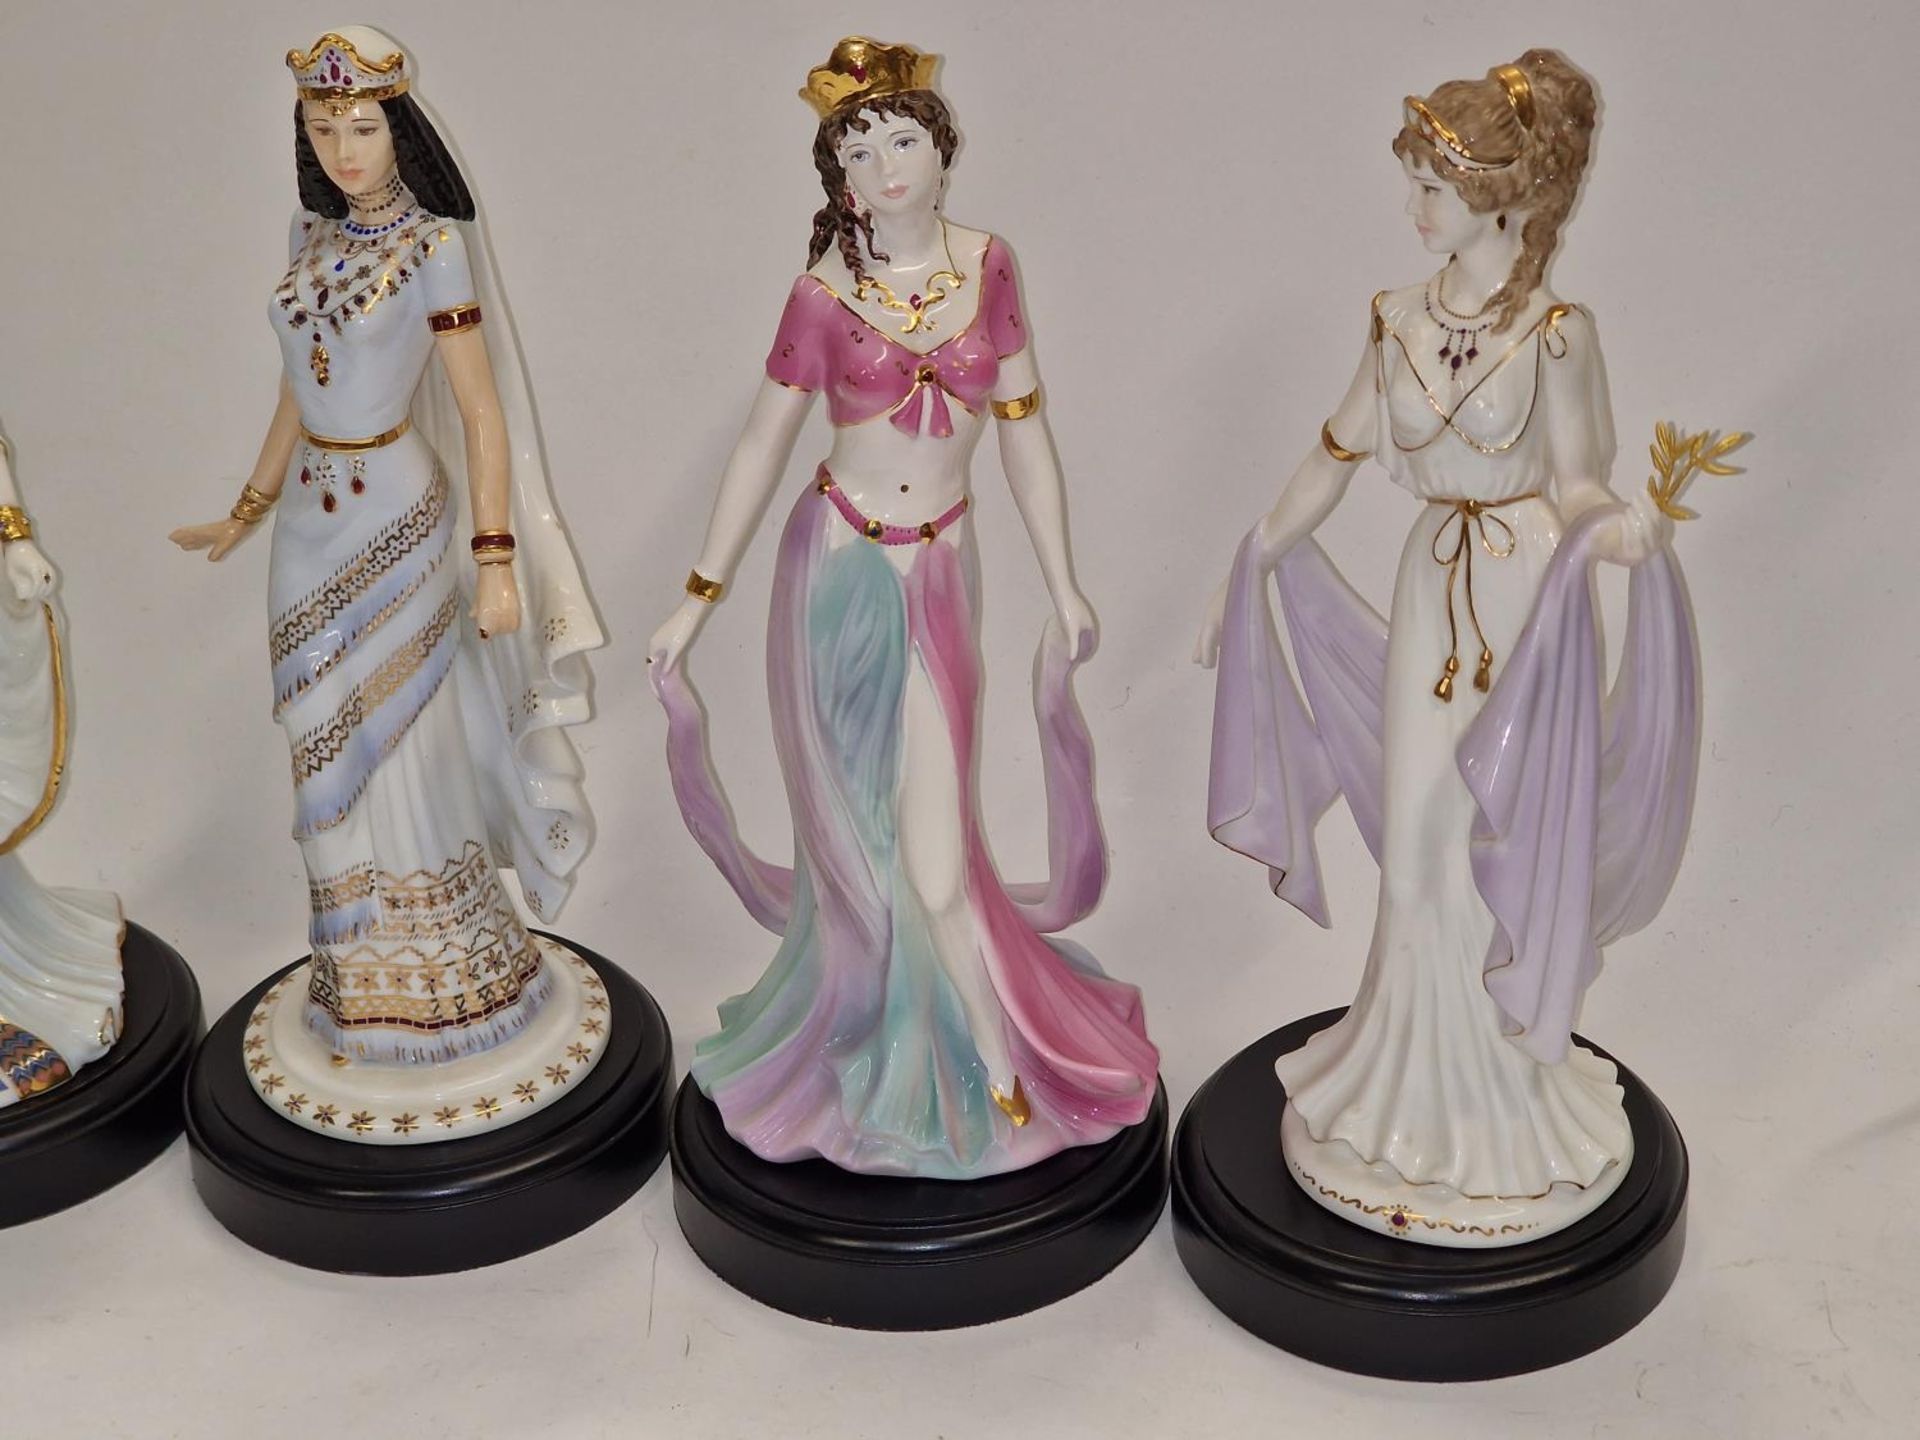 Coalport limited edition collection of David Cornell figurines on wooden bases (5). - Image 3 of 5